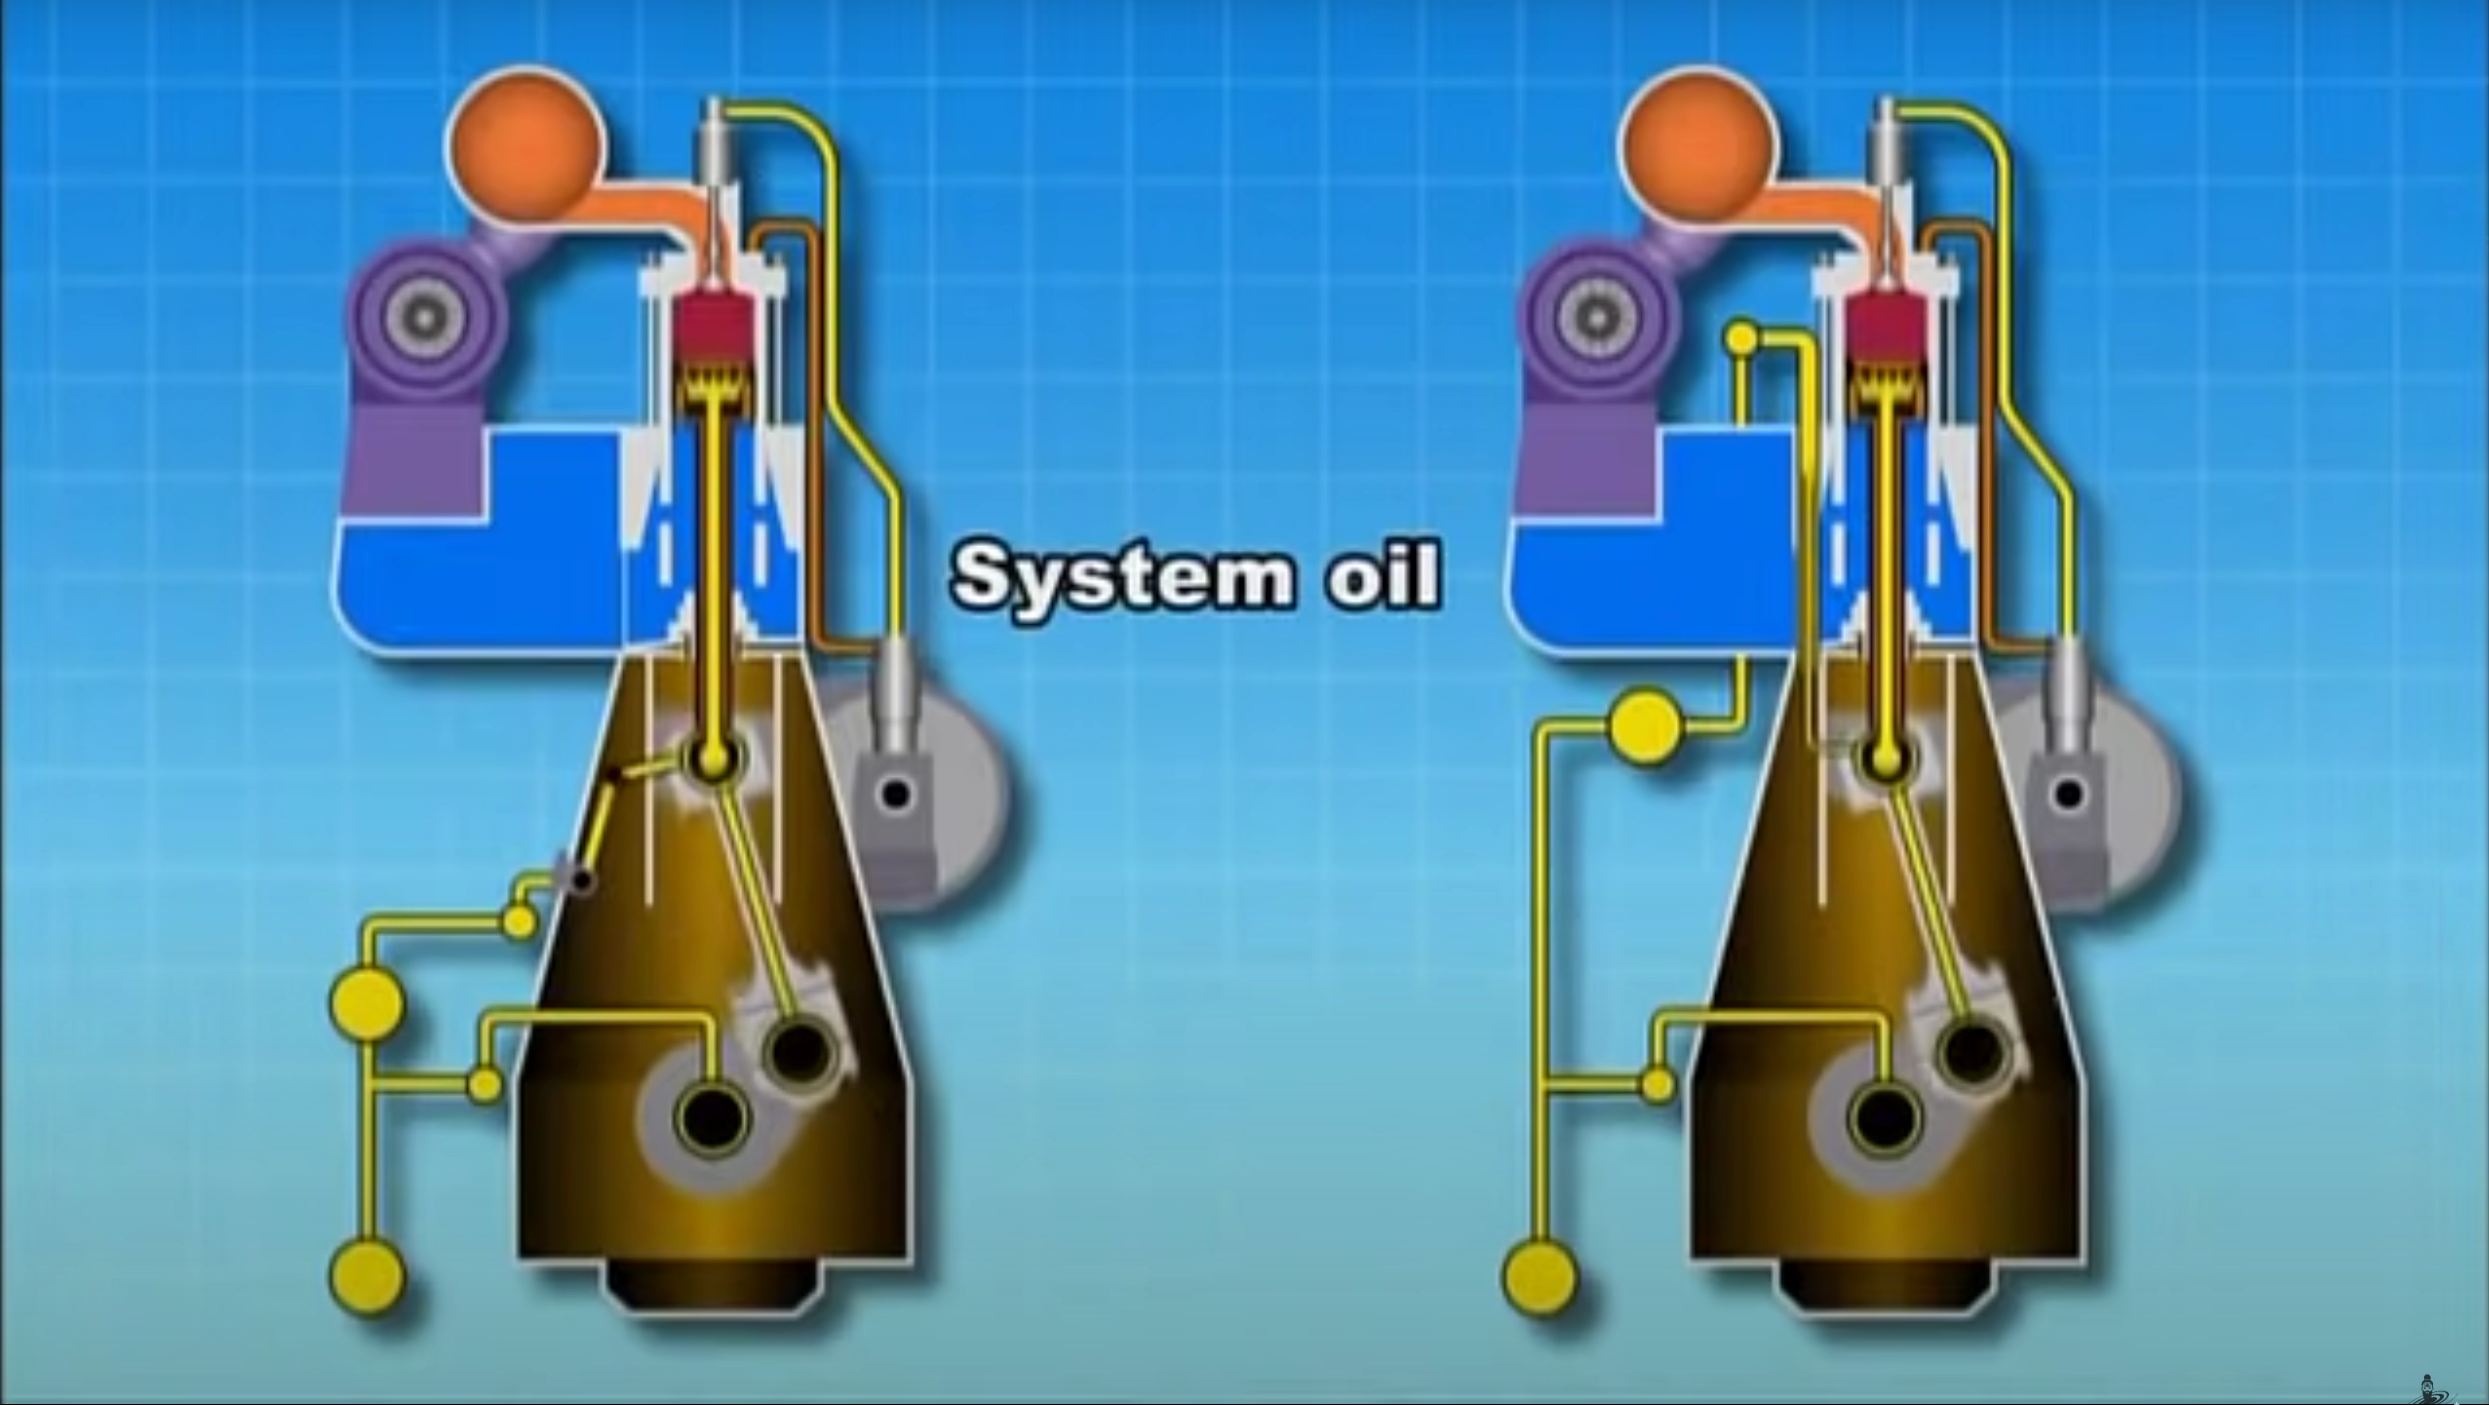 Lubricating Oil Systems on Two-Stroke Marine Diesel Engines